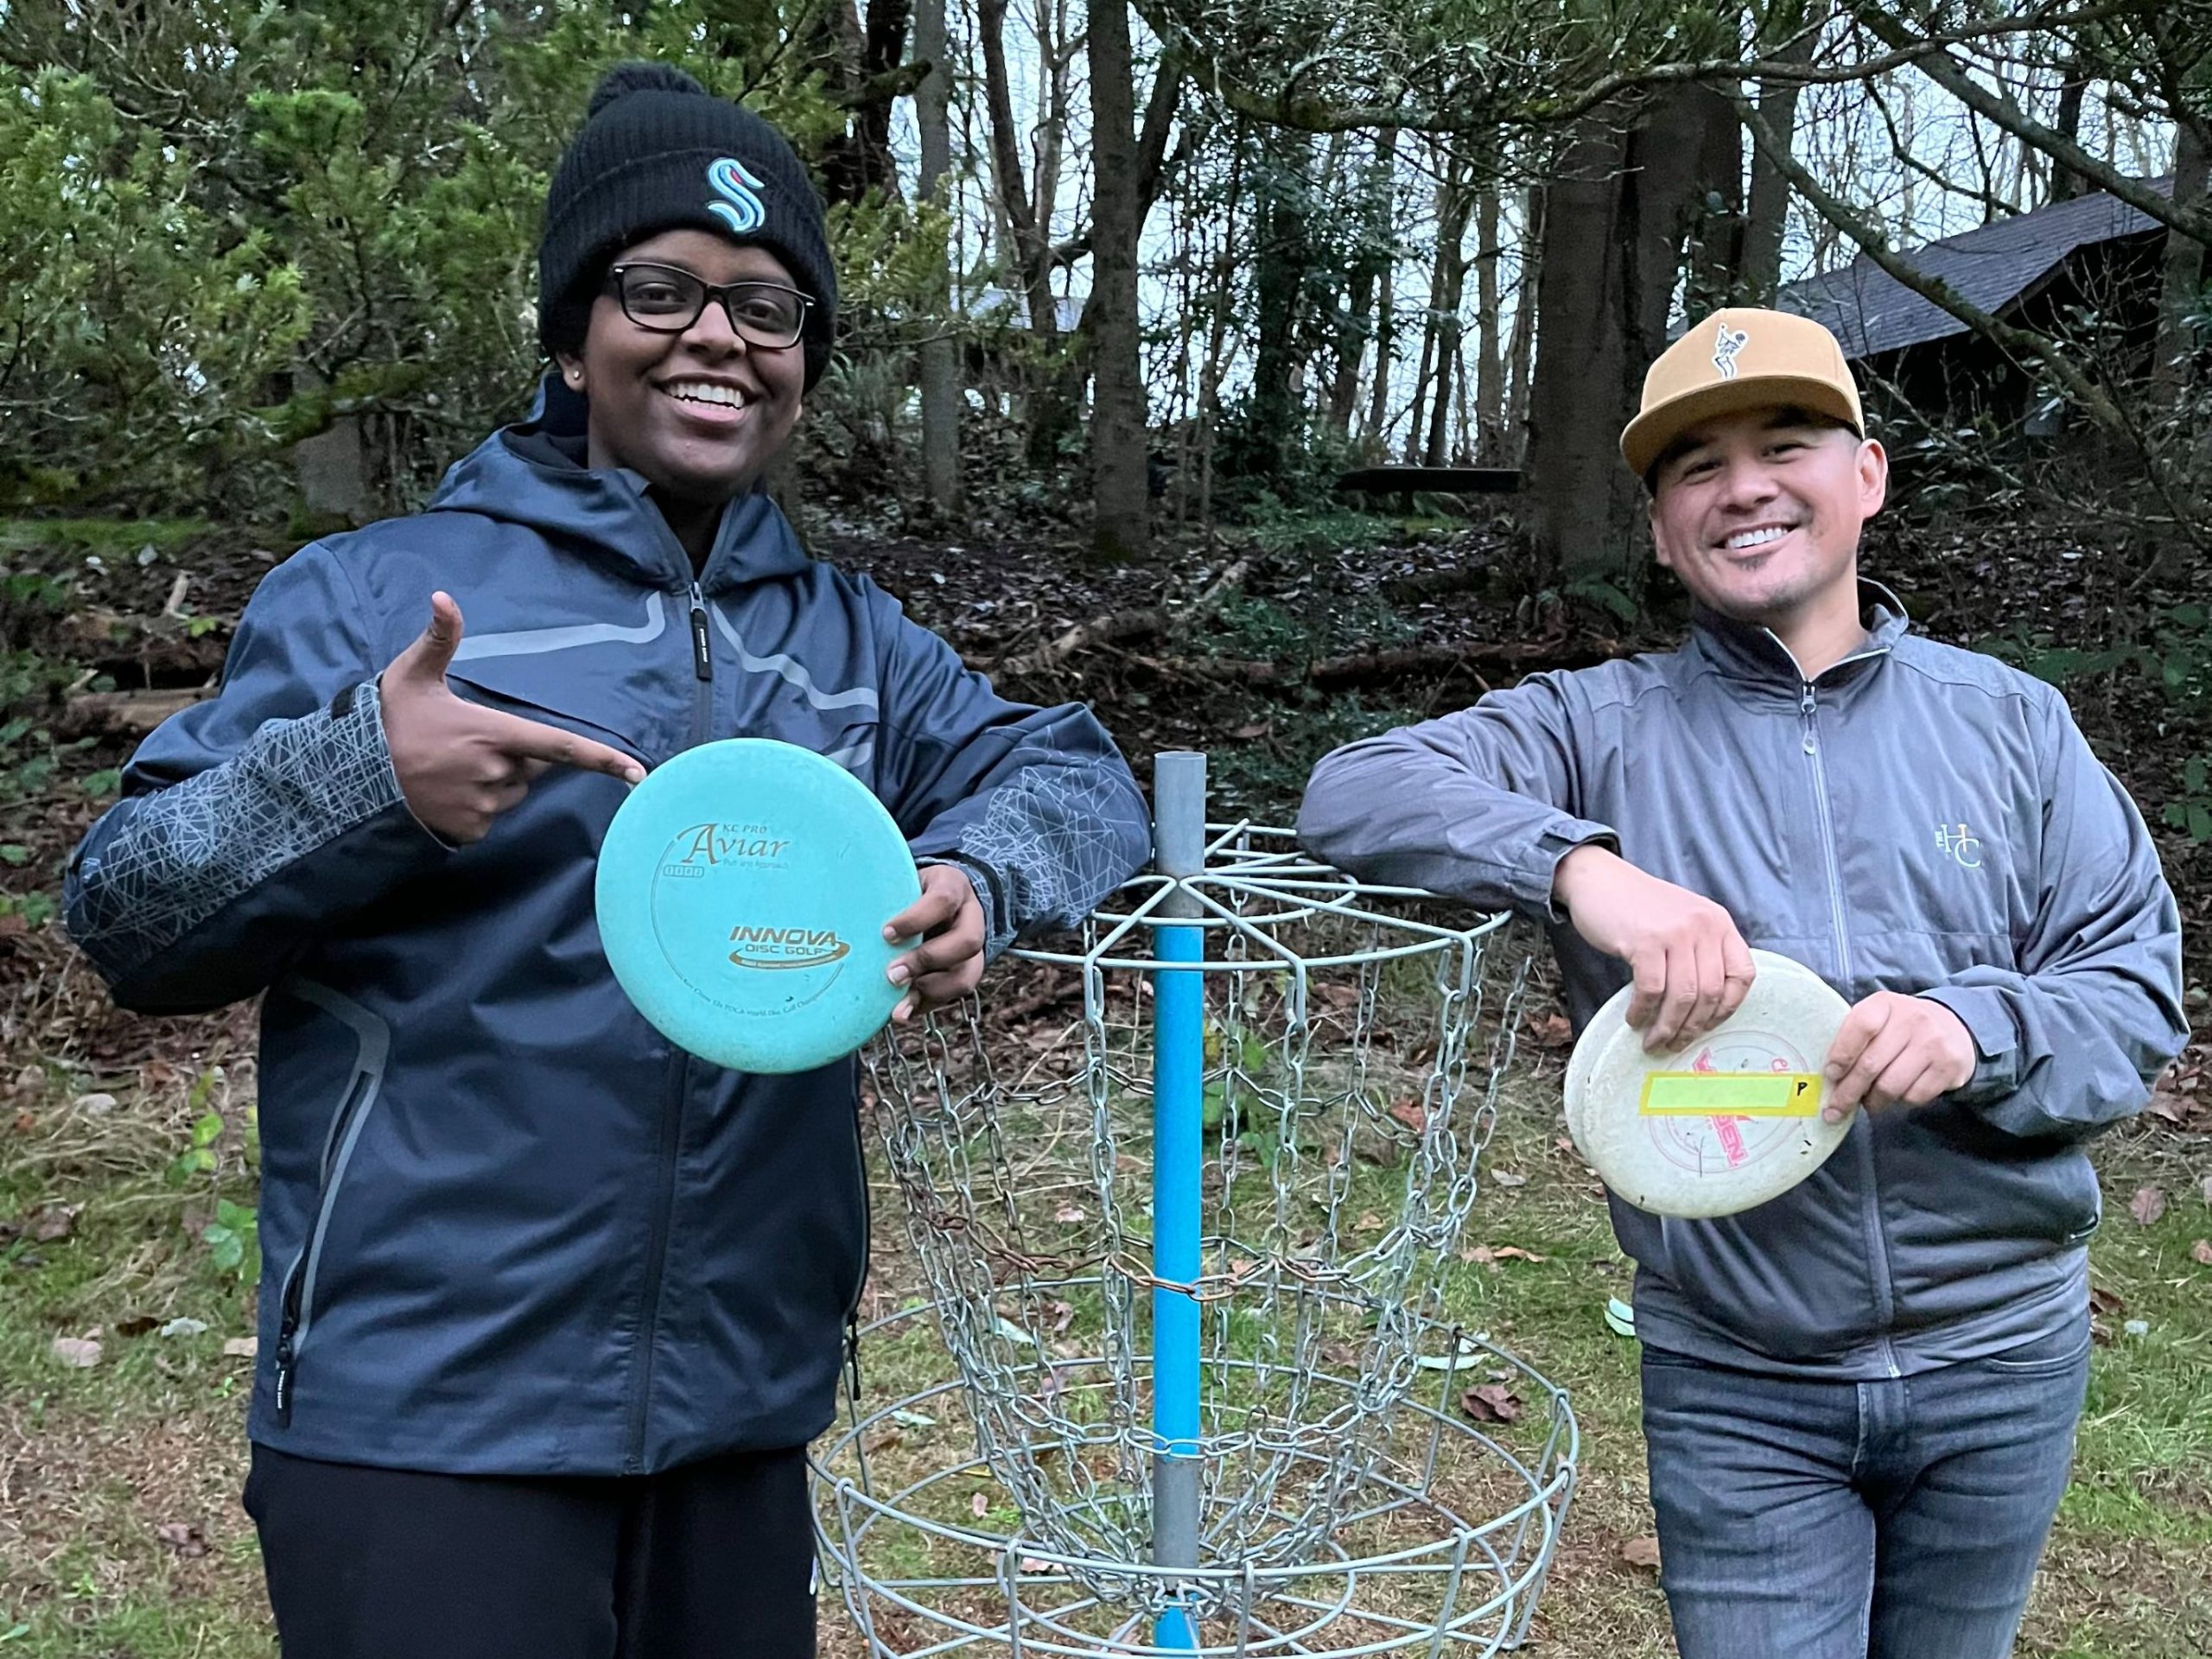 Two smiling people holding discs near a disc golf basic